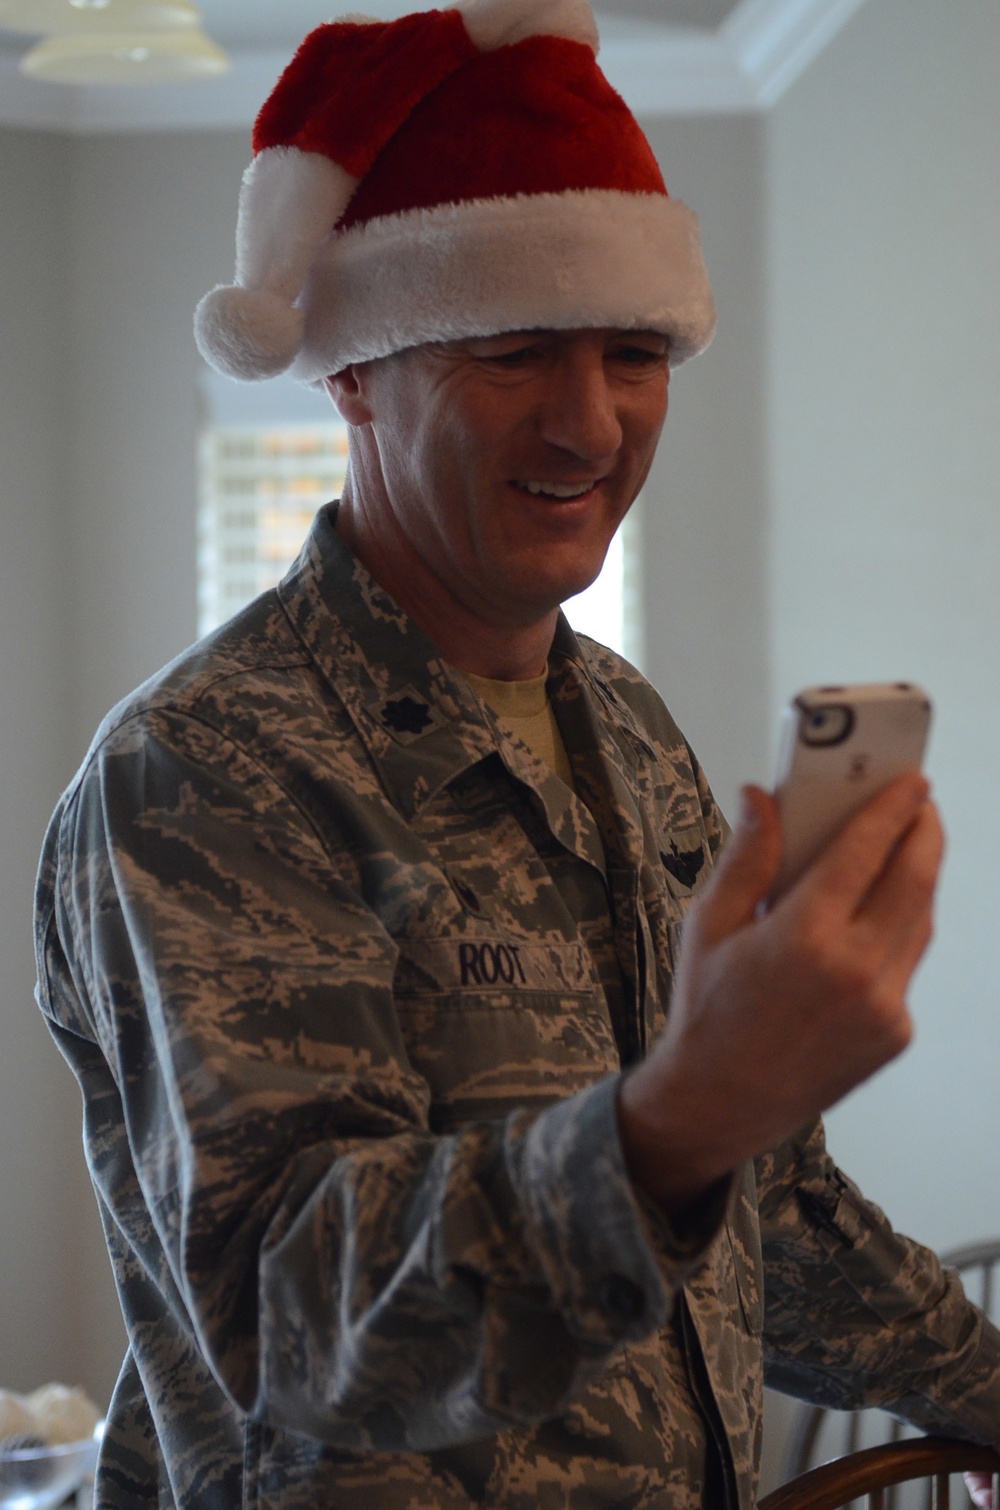 Christmas comes early for Air Force families